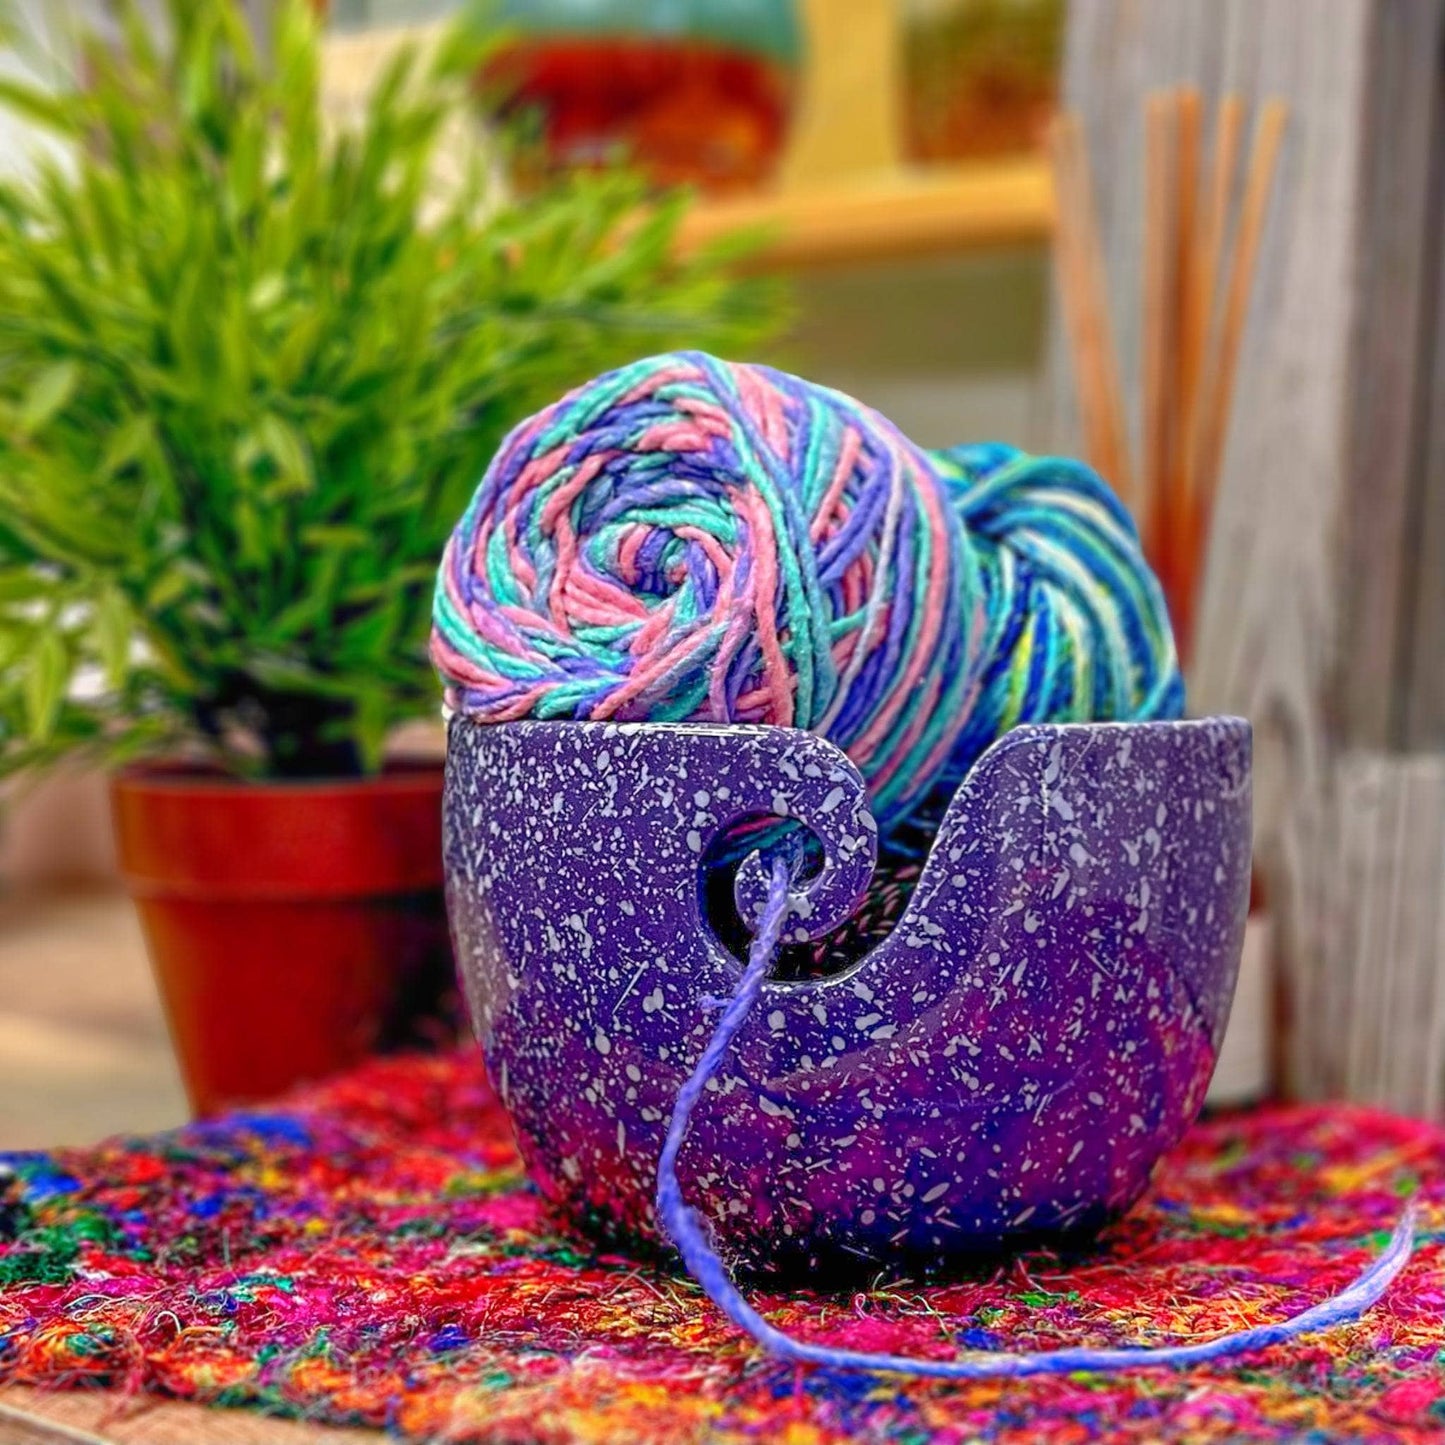 Purple speckled yarn bowl with three colorful skeins in it. A plant and incense can be seen in the background.